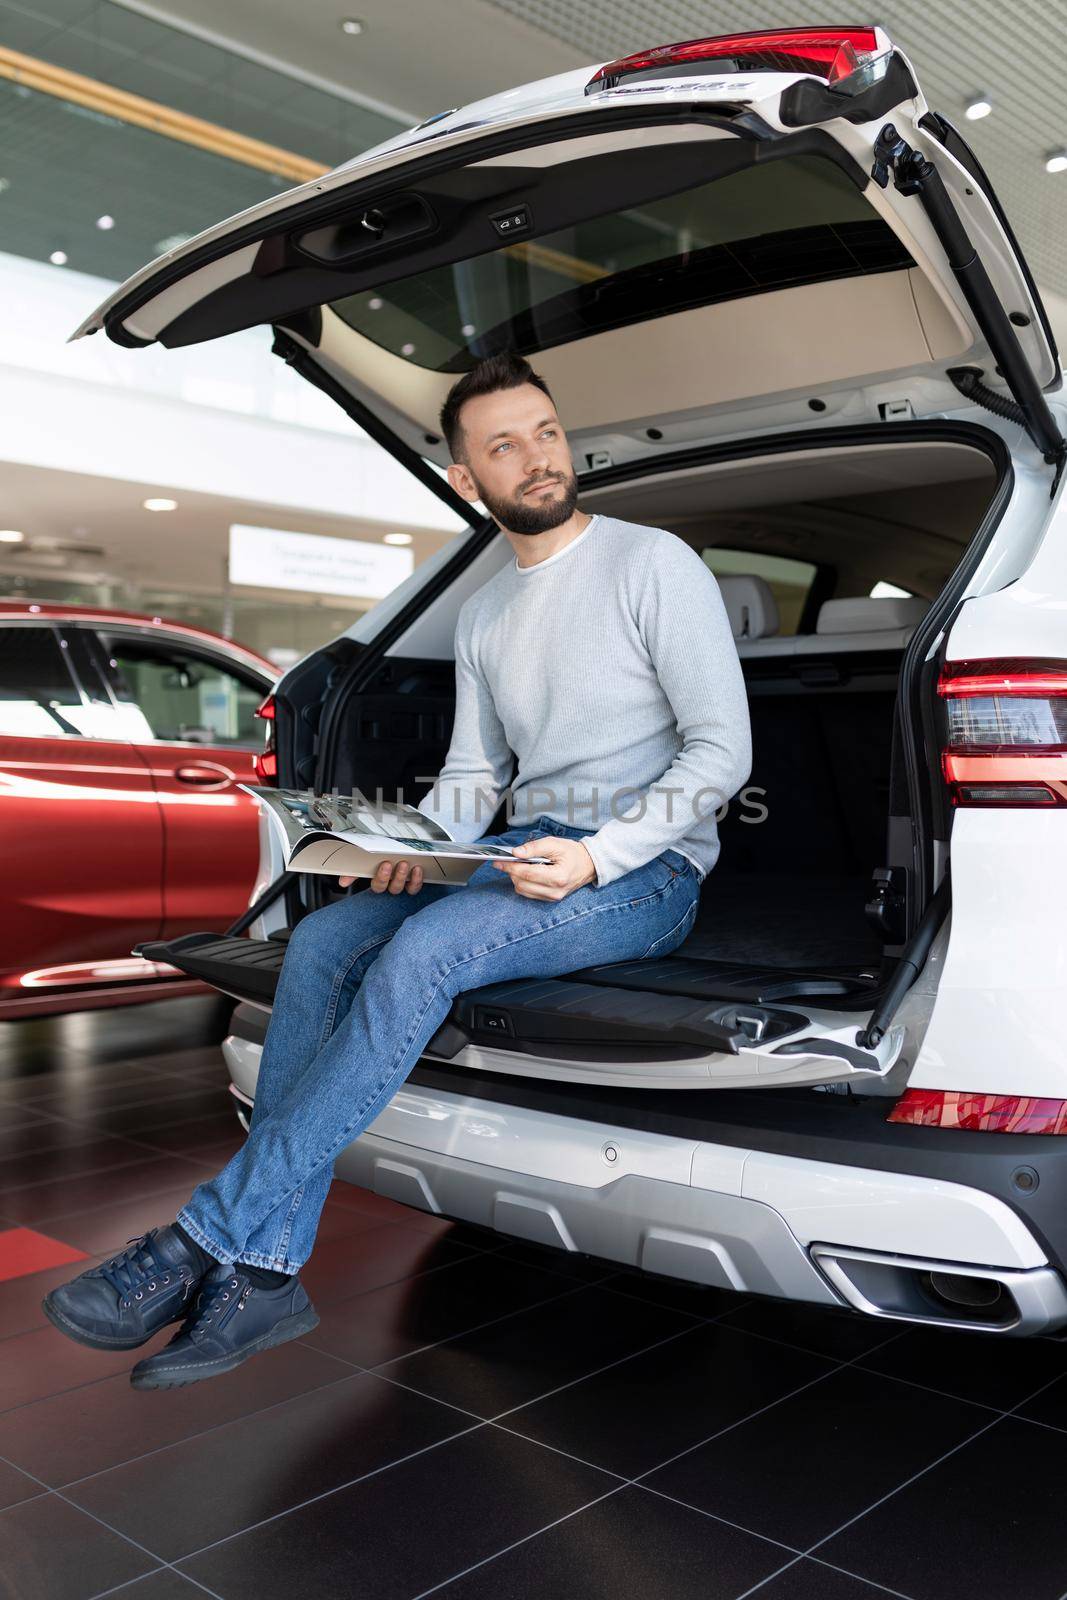 A man sits in the trunk of an SUV and dreams of buying it by TRMK